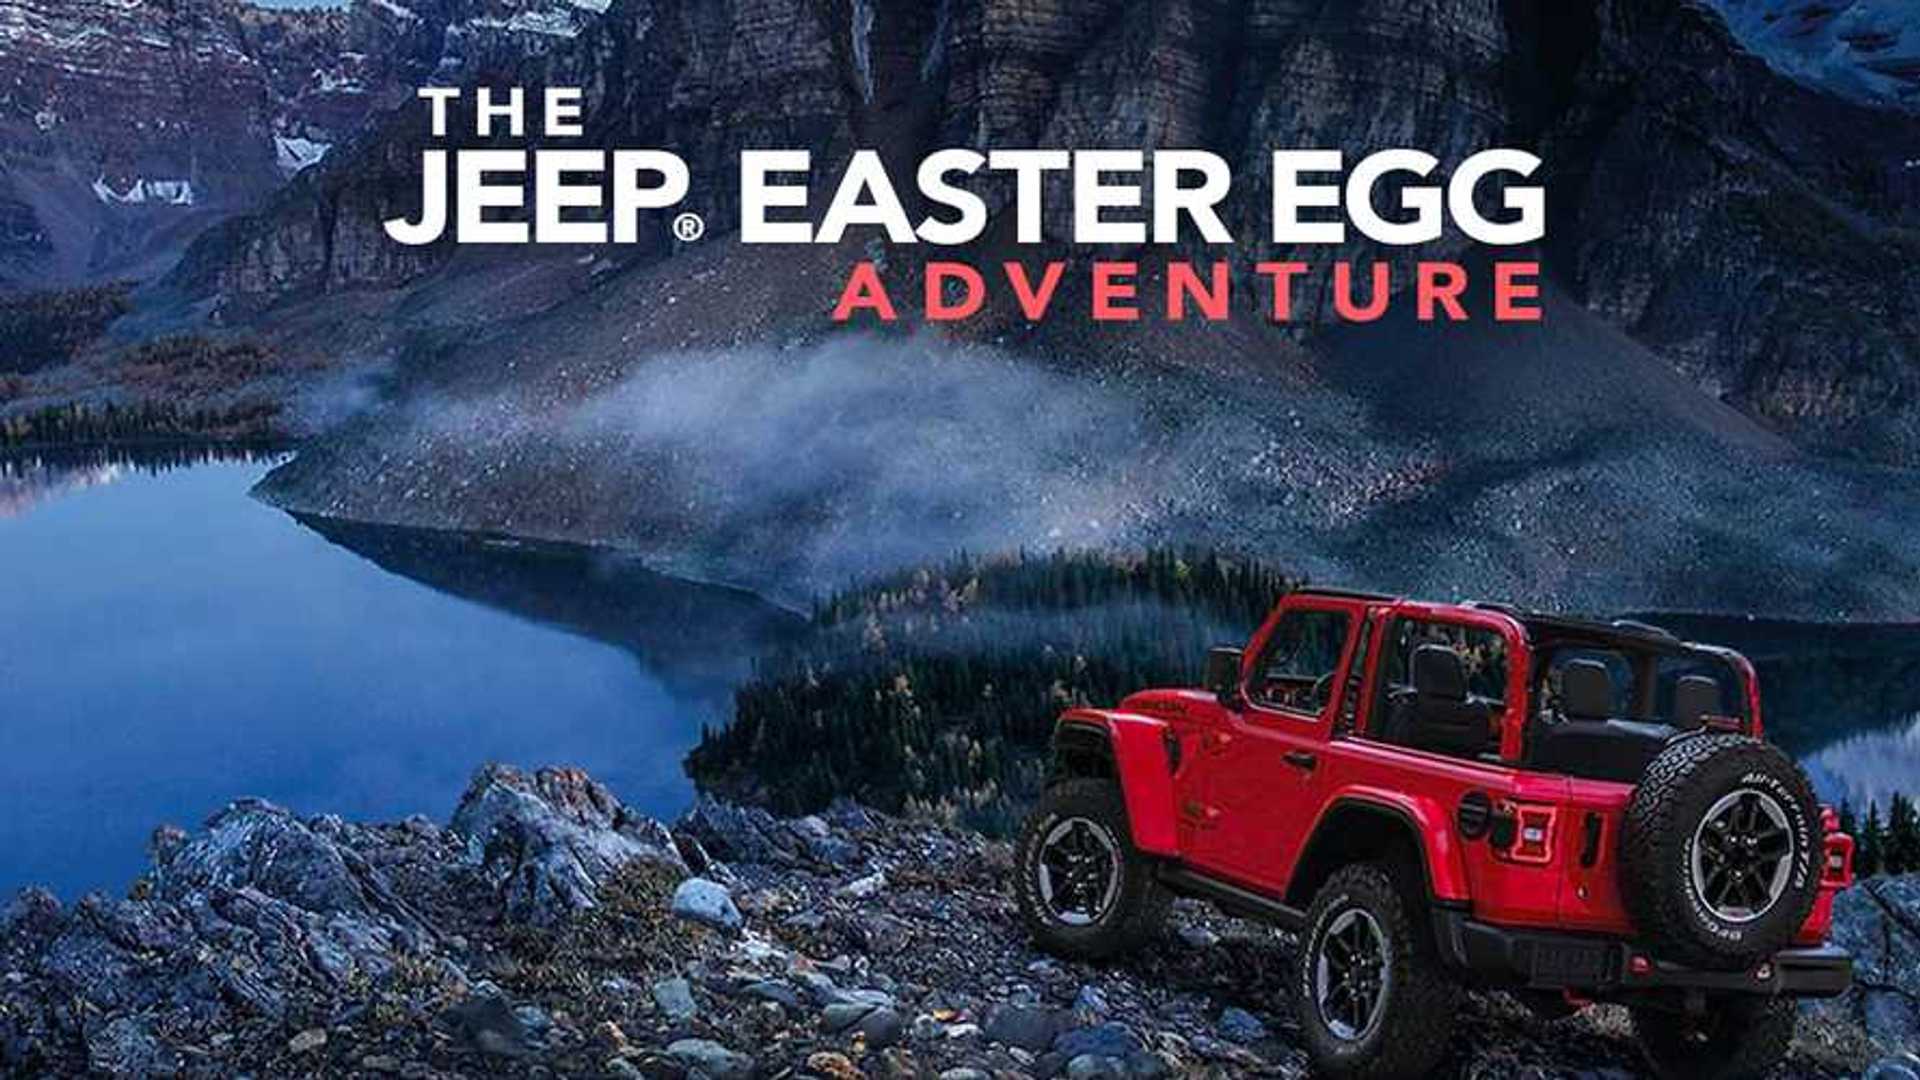 34+ Where Are Jeep Grand Cherokee Easter Eggs Images